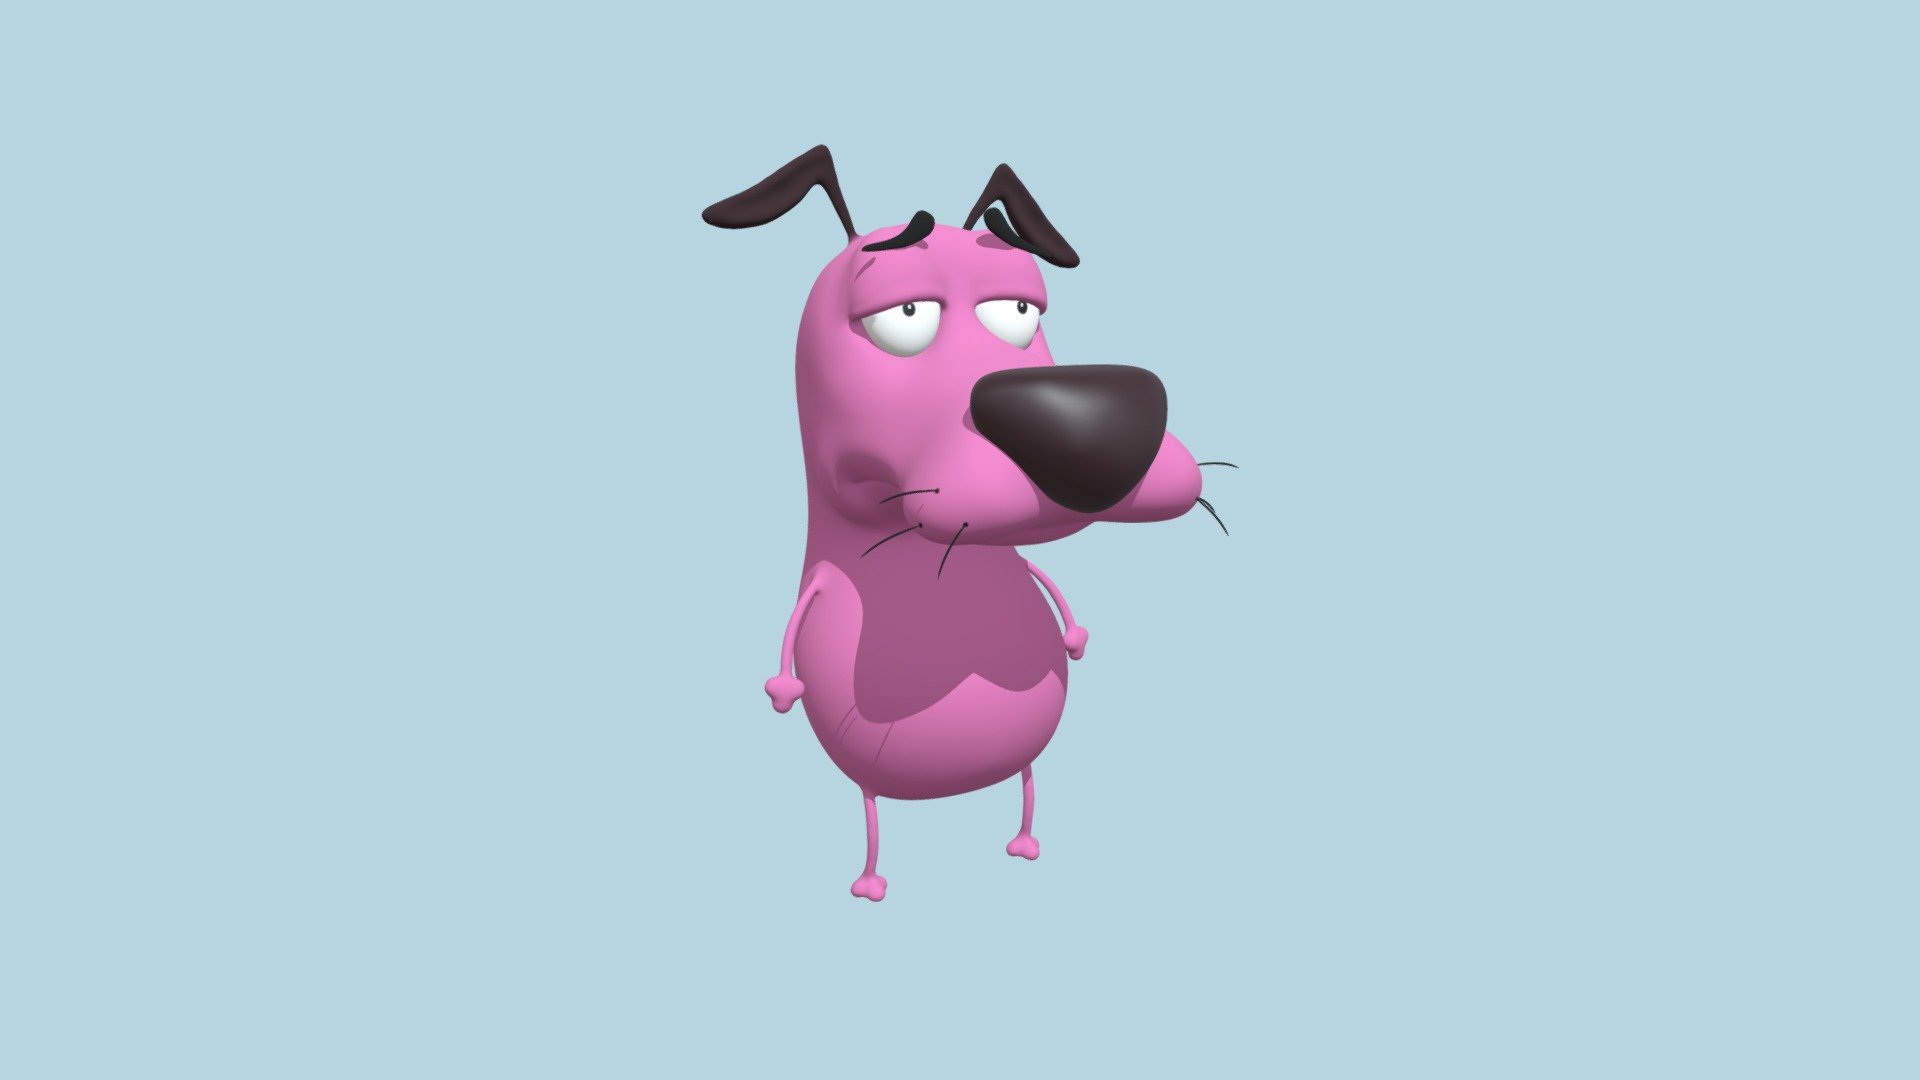 Coragem, o Cão Covarde
- Courage, the Cowardly Dog - Courage, the Cowardly Dog (Coragem) - Buy Royalty Free 3D model by Sommer (@gsommer) 3d model